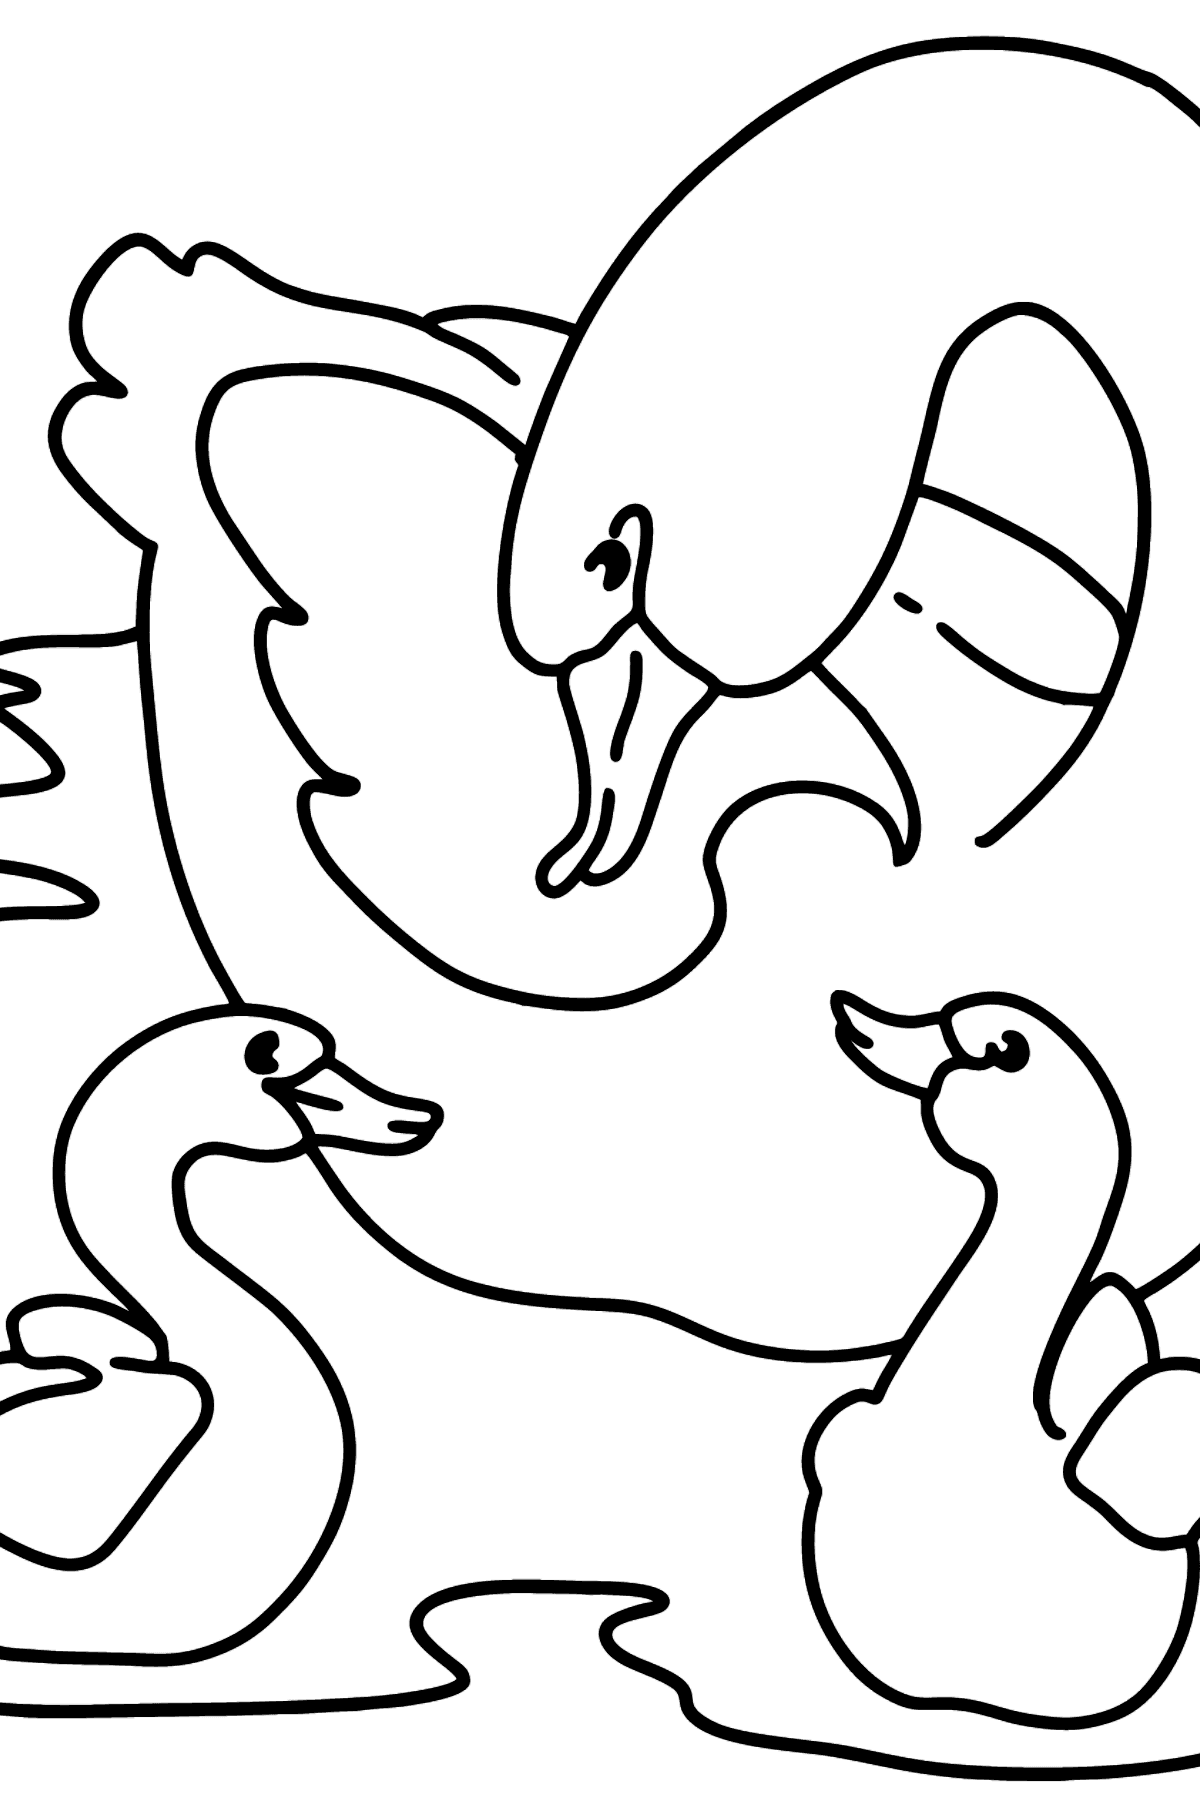 Duck with Ducklings on the Lake coloring page - Coloring Pages for Kids